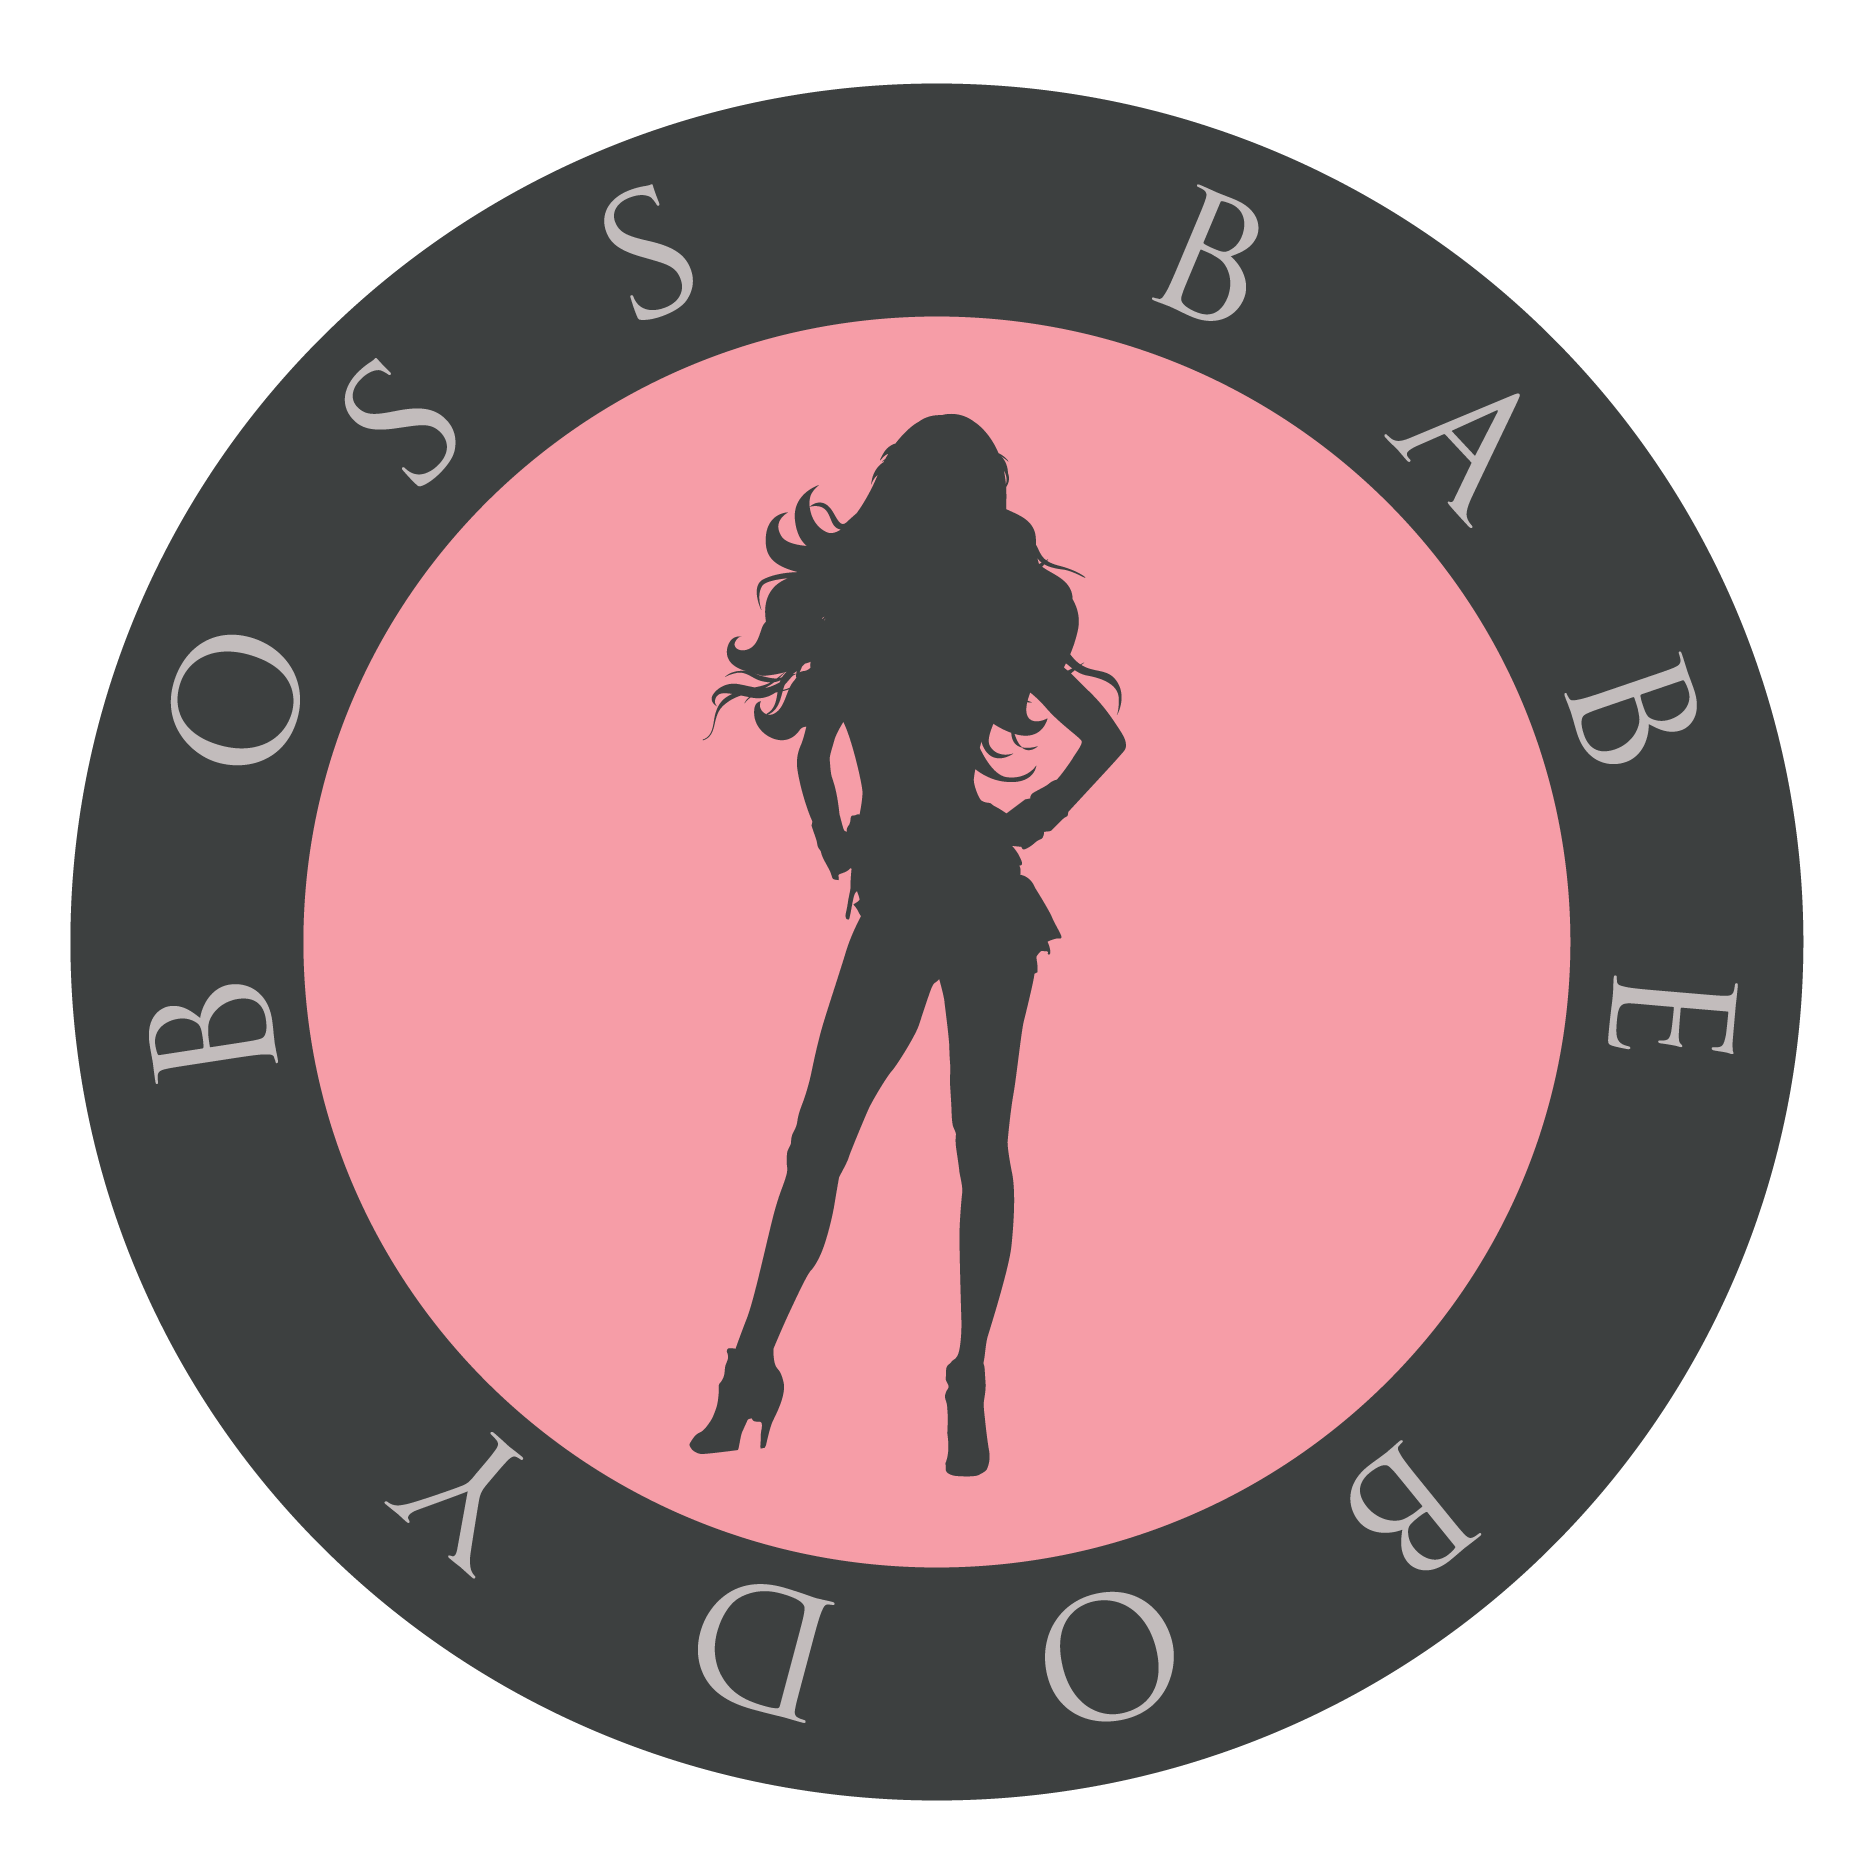 Boss Babe Body is a 100% organic all natural body scrub targeting cellulite, stretch marks, acne, psoriasis, dry skin, eczema, scars & other skin imperfections